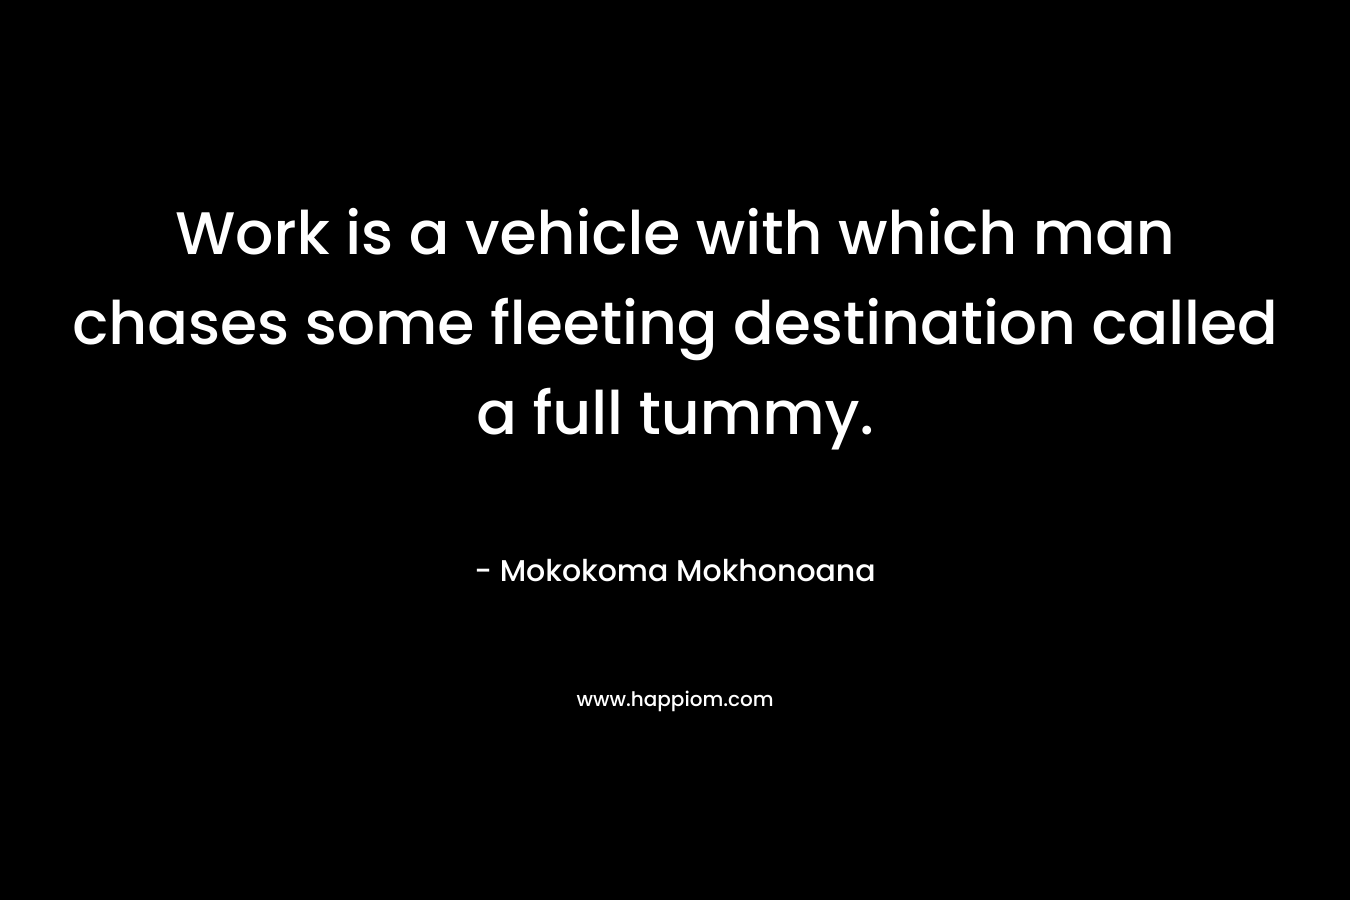 Work is a vehicle with which man chases some fleeting destination called a full tummy. – Mokokoma Mokhonoana